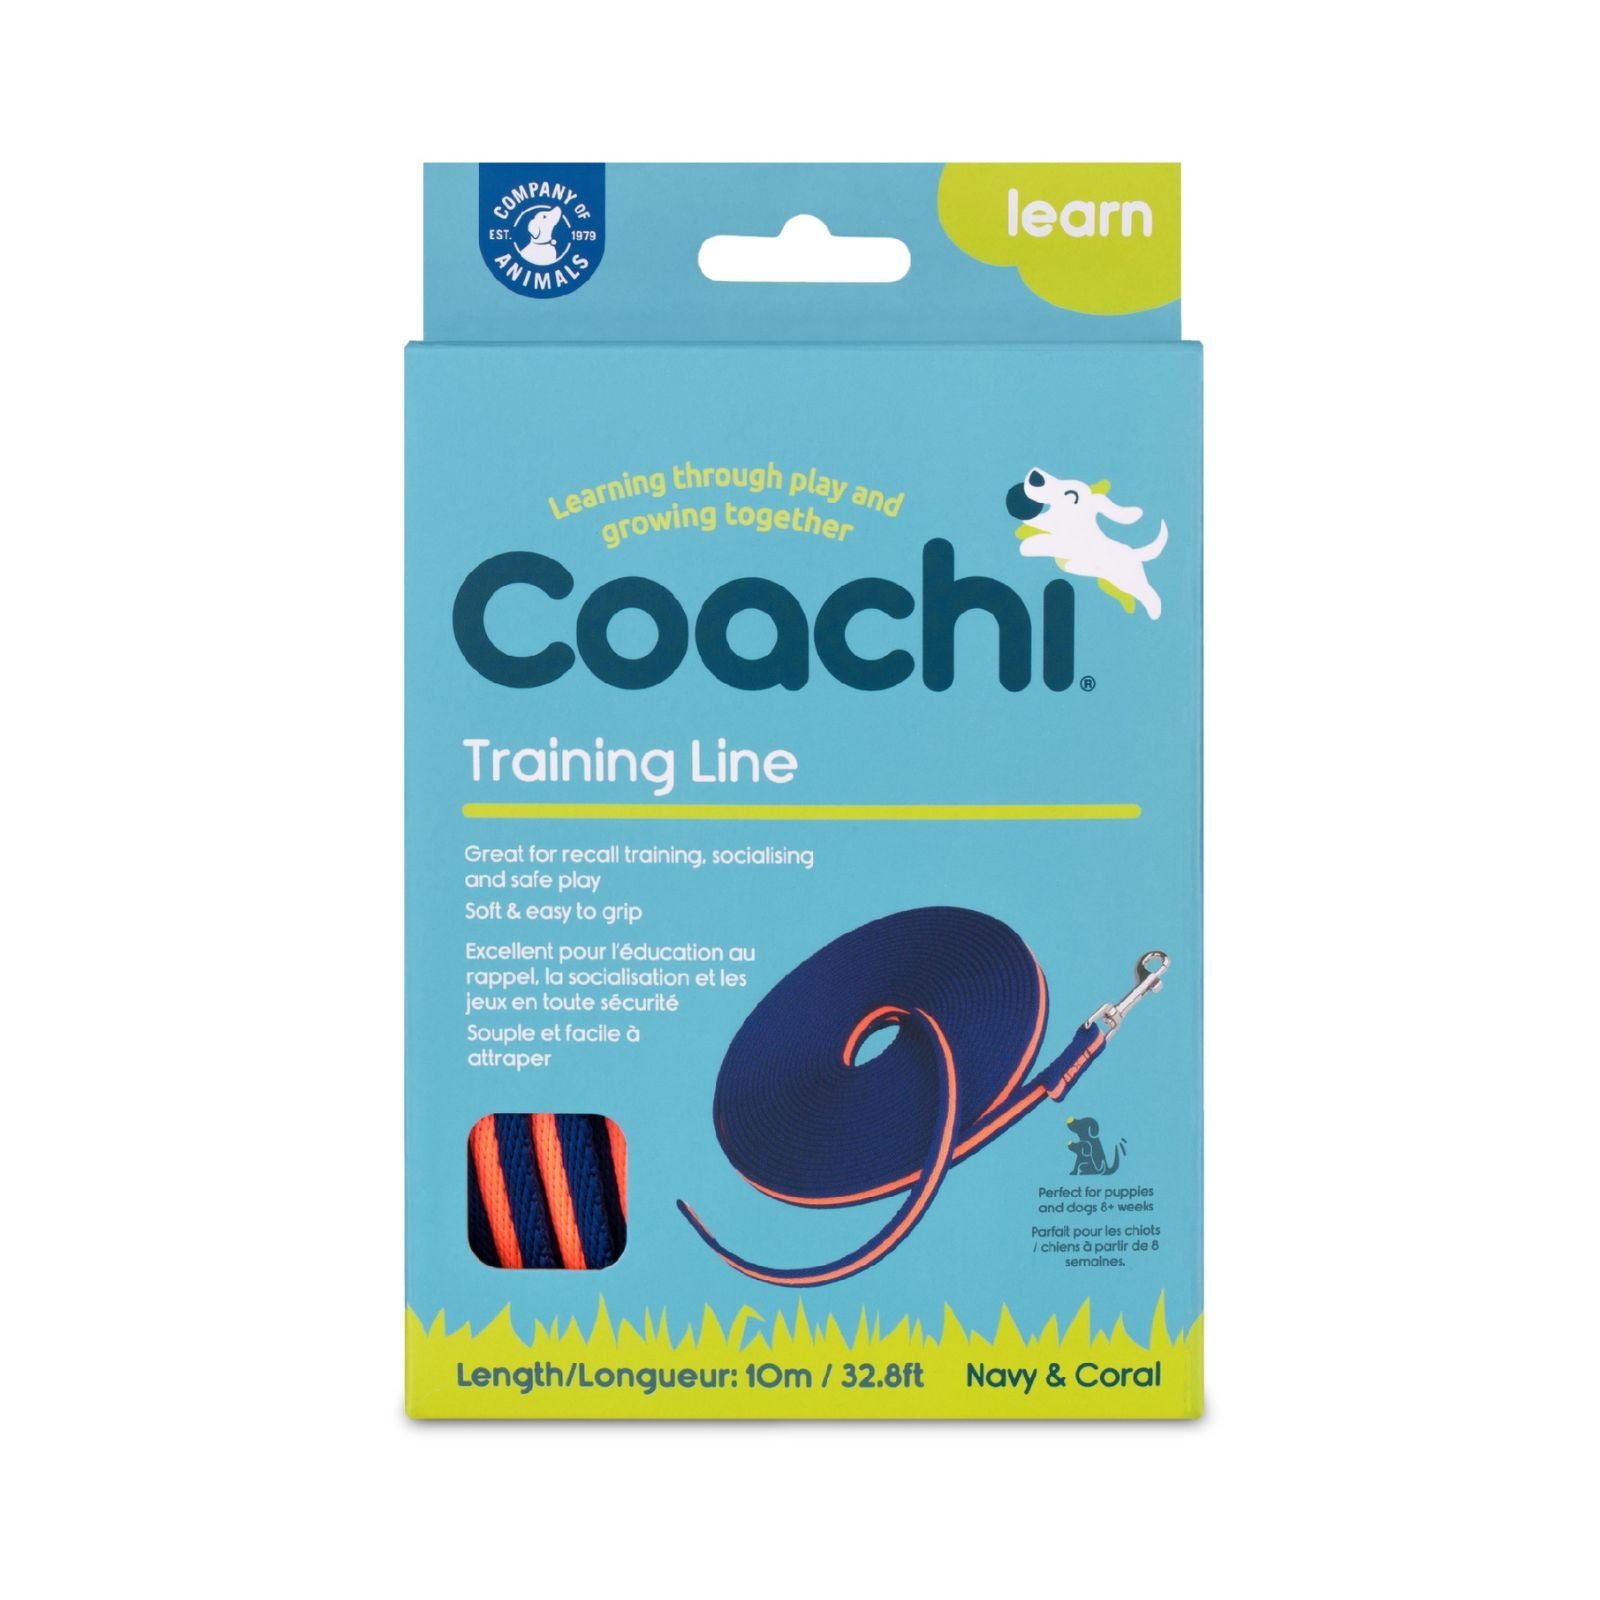 COACHI Training Line retail pack. 10m recall lead for dogs.